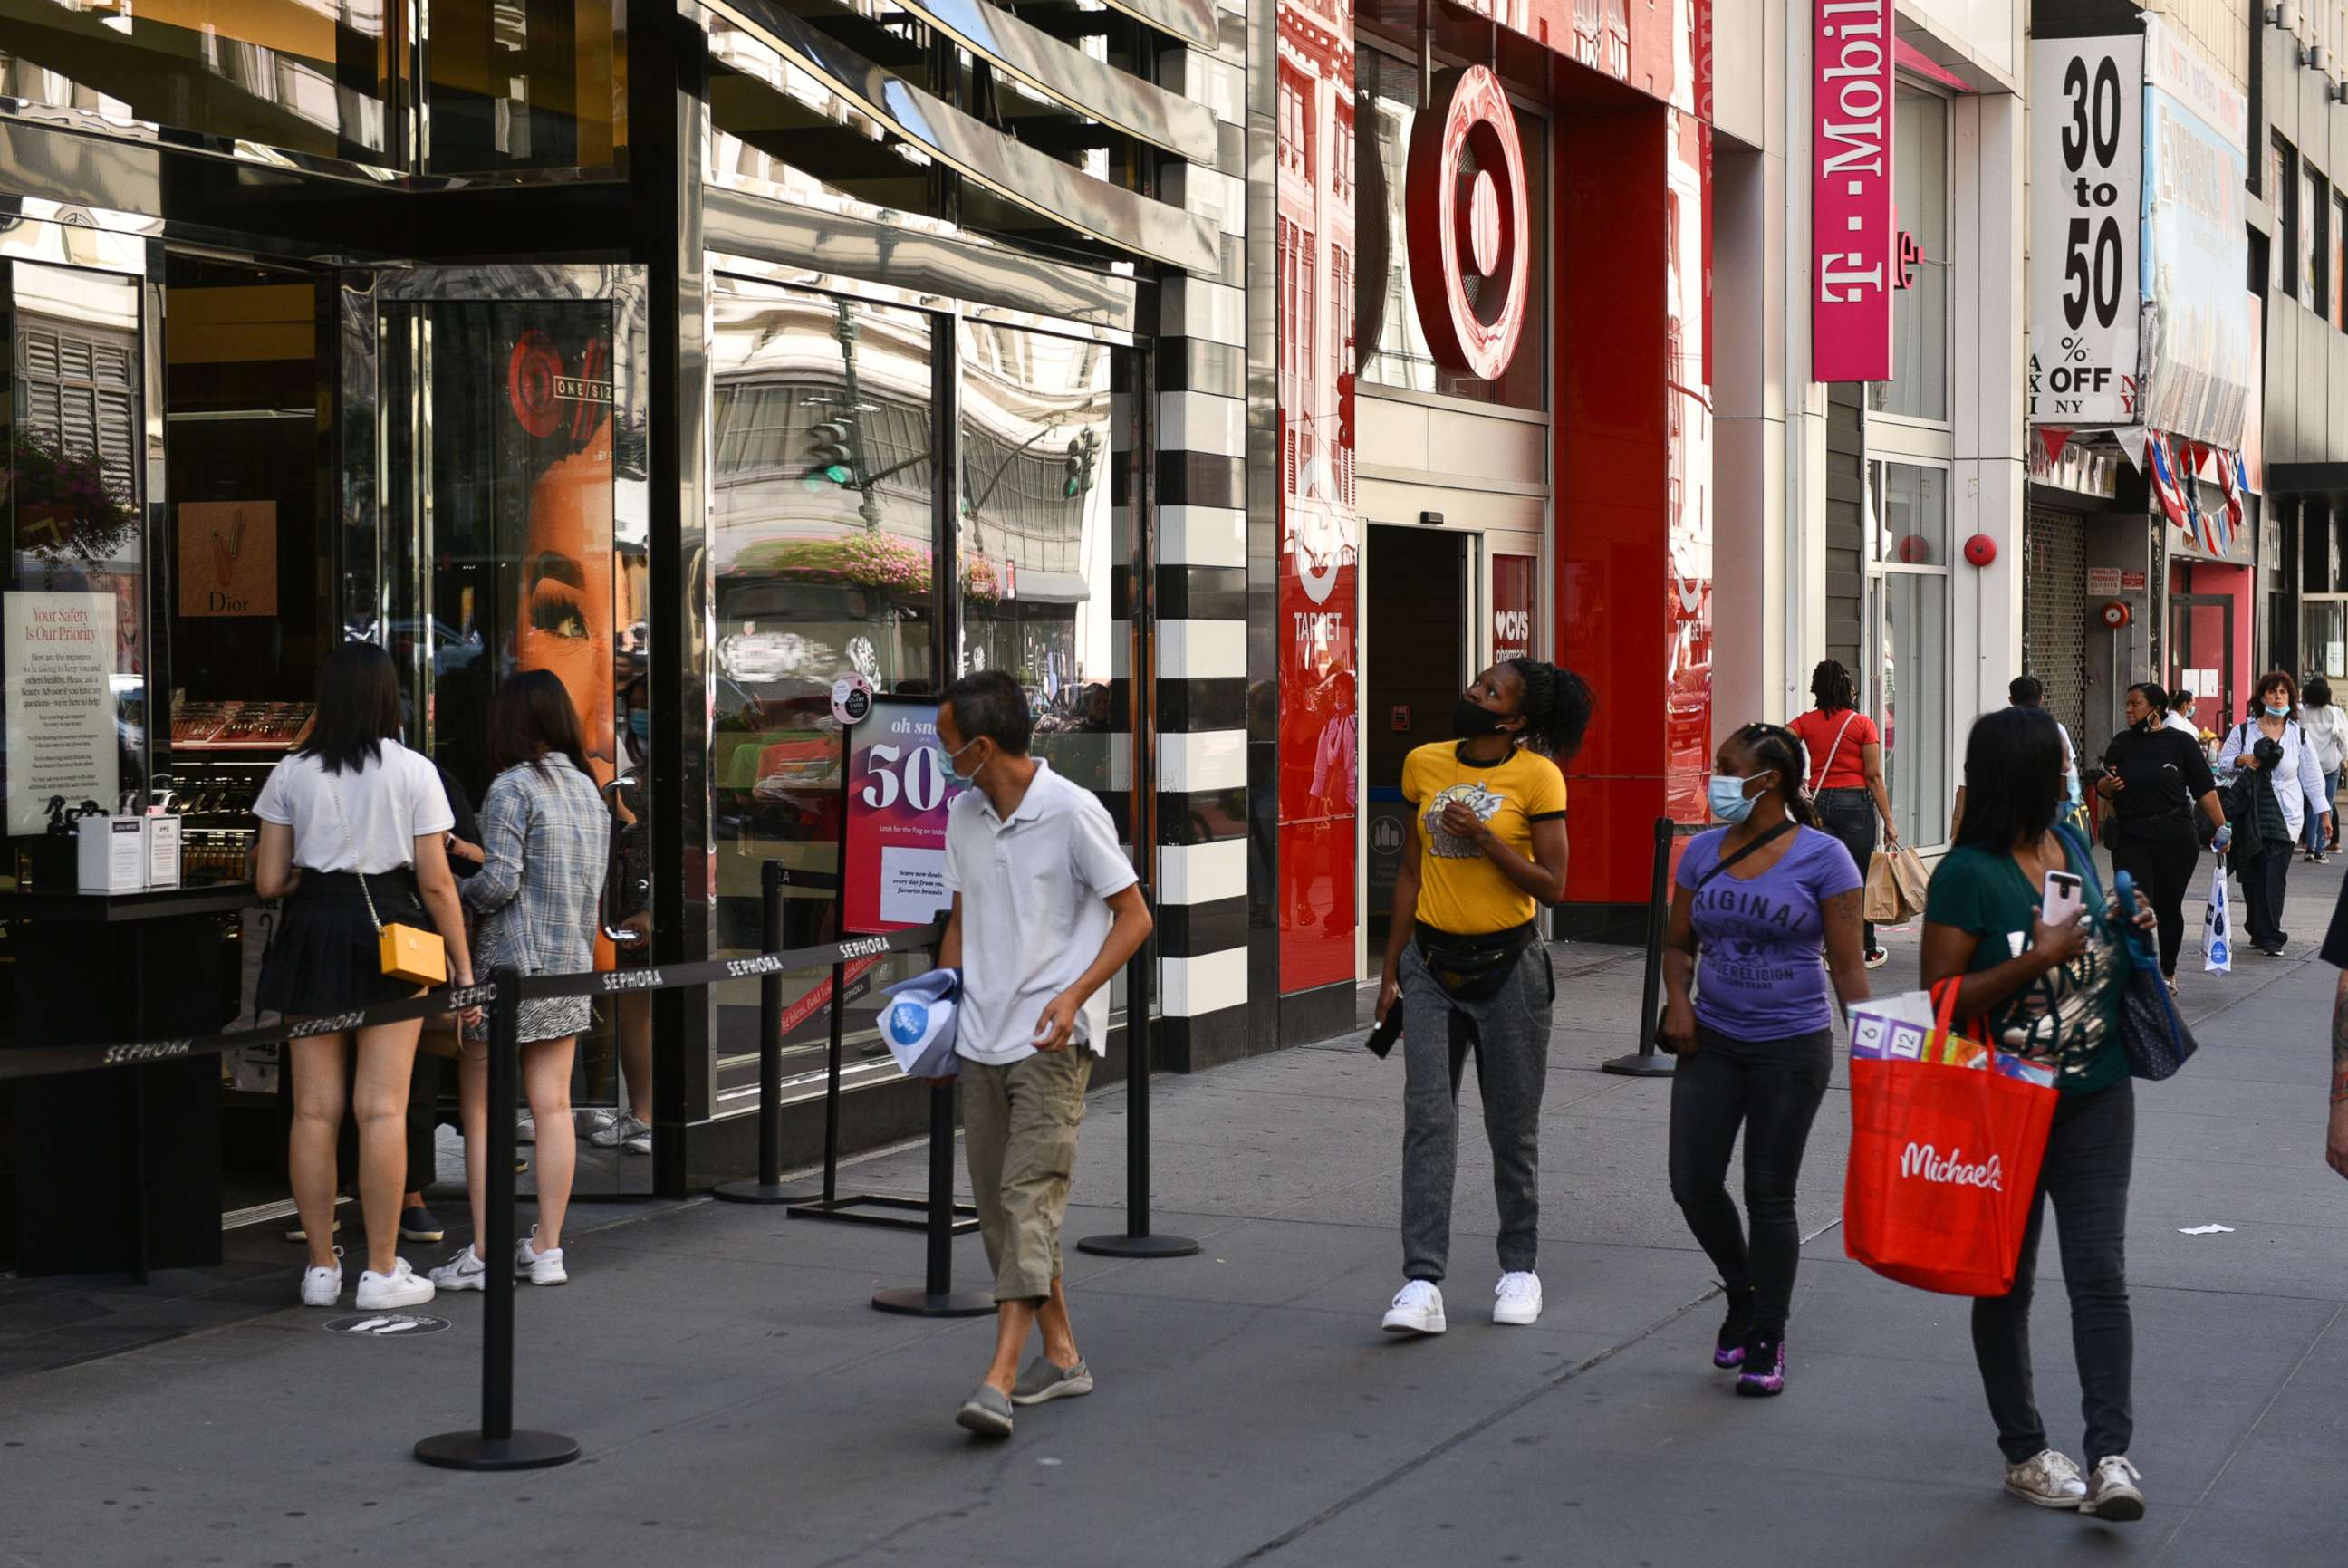 PHOTO: In this Sept. 1, 2020, file photo, people wear protective face masks while shopping along 34th Street in New York.